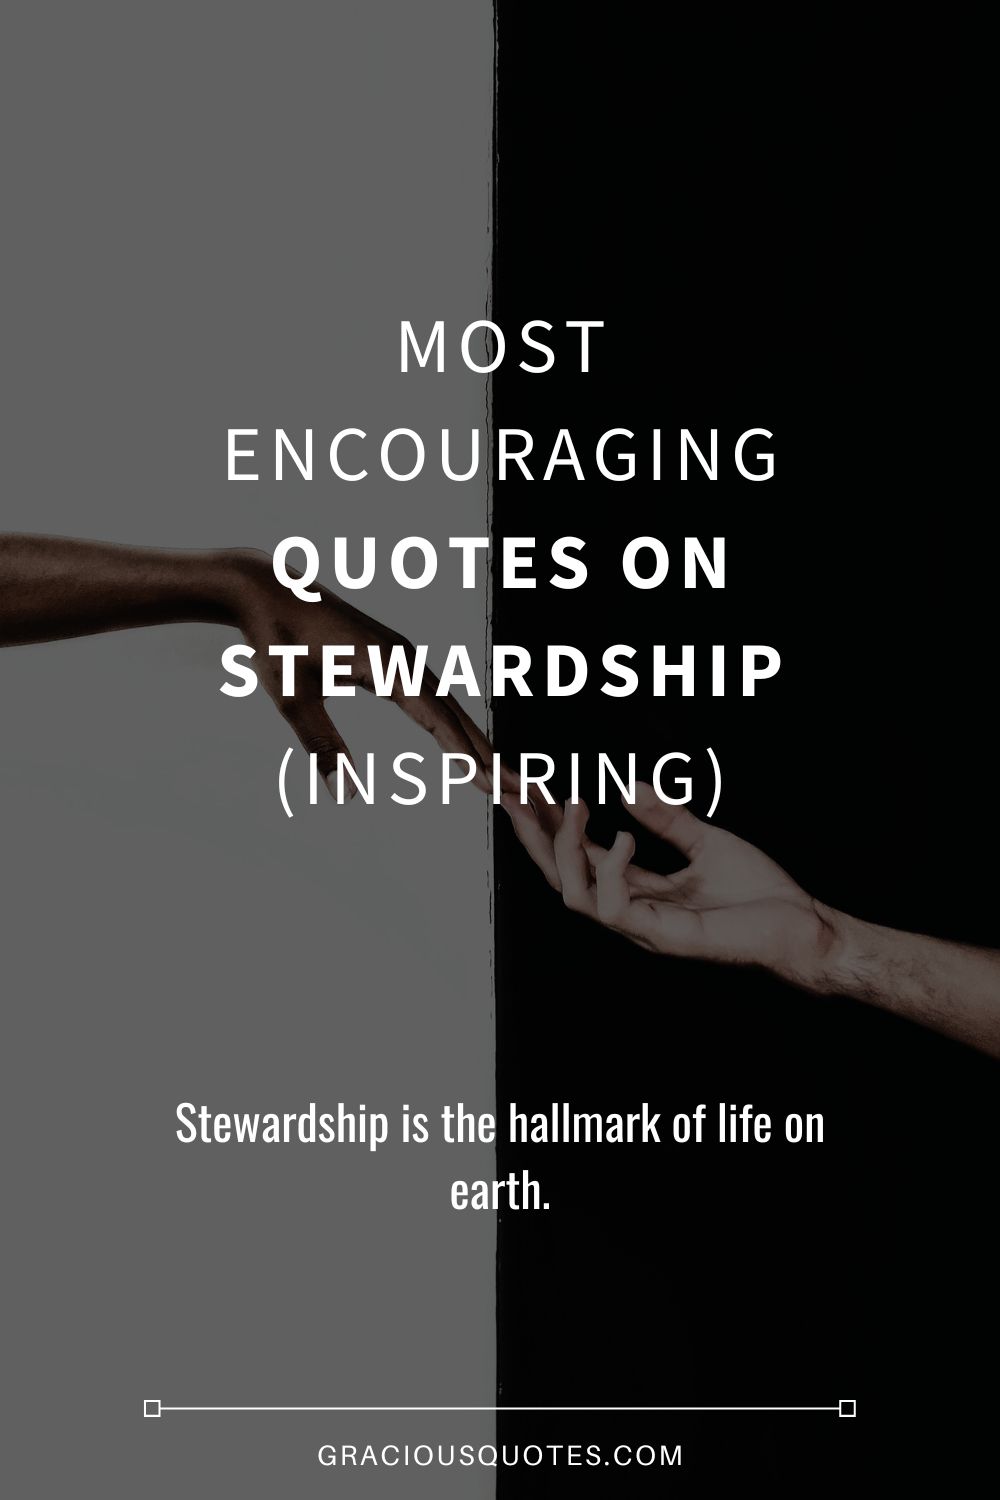 Most Encouraging Quotes on Stewardship (INSPIRING) - Gracious Quotes